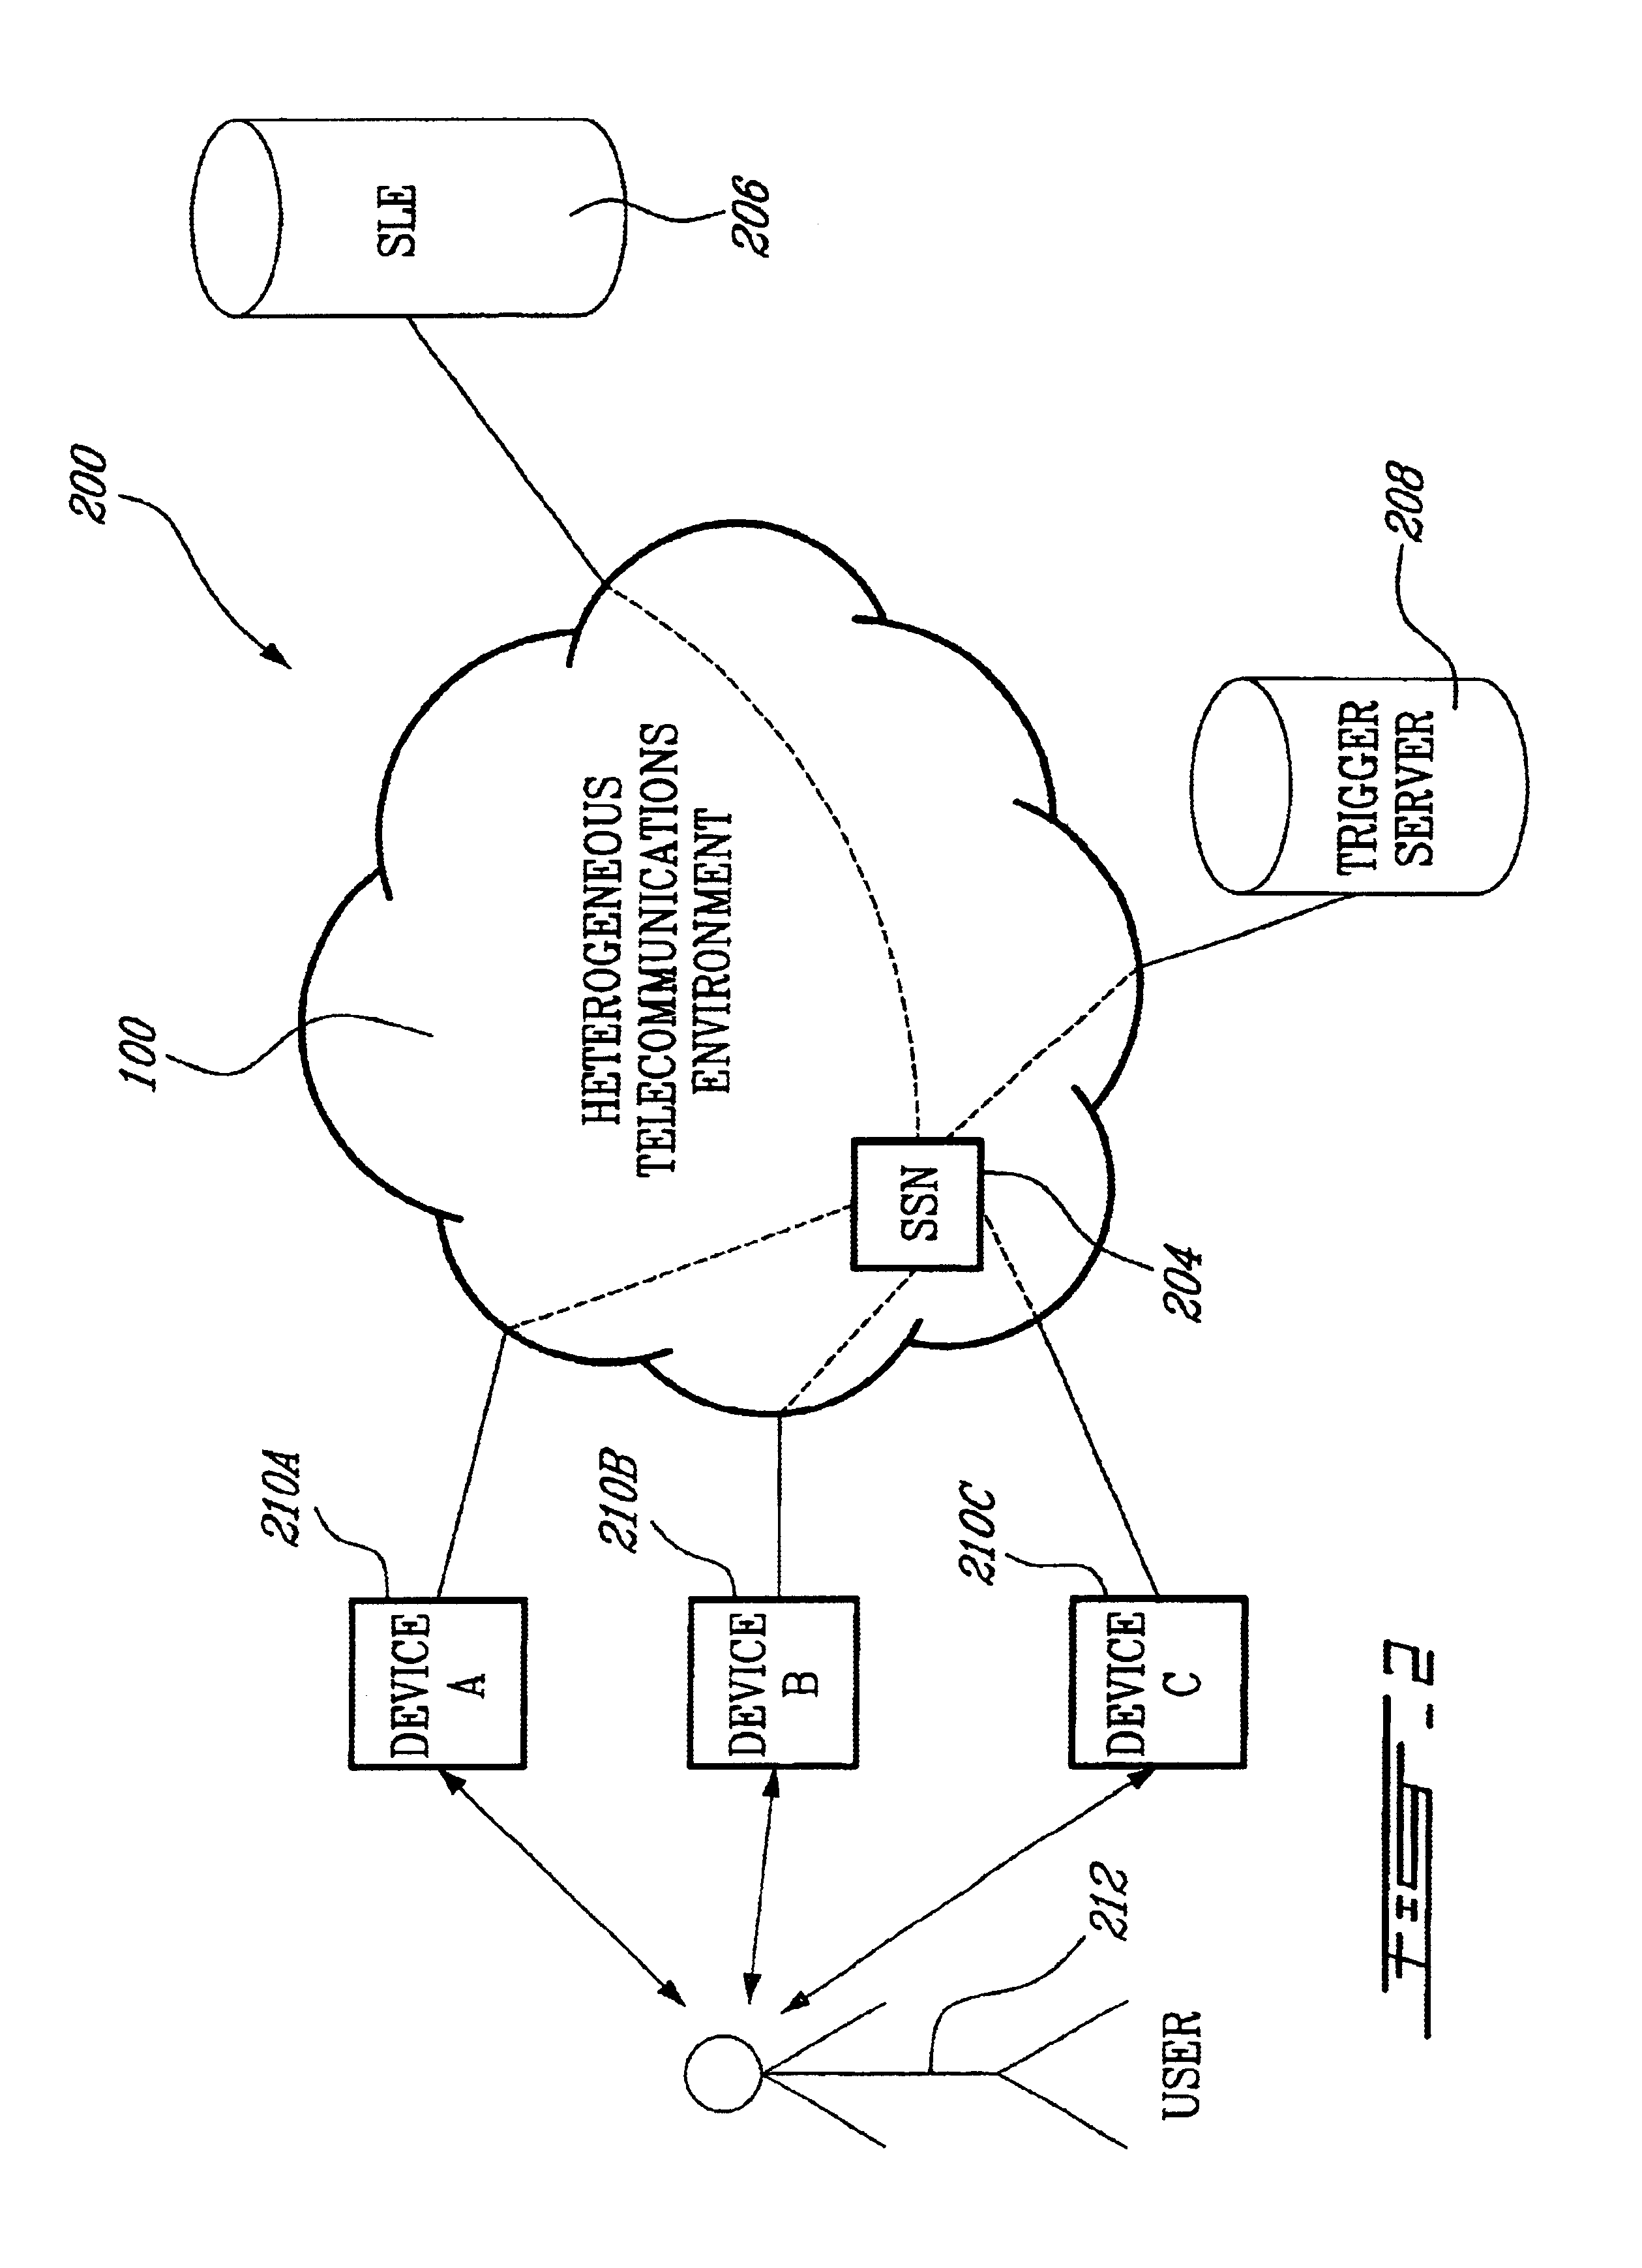 System and method for providing device-aware services in an integrated telecommunications network